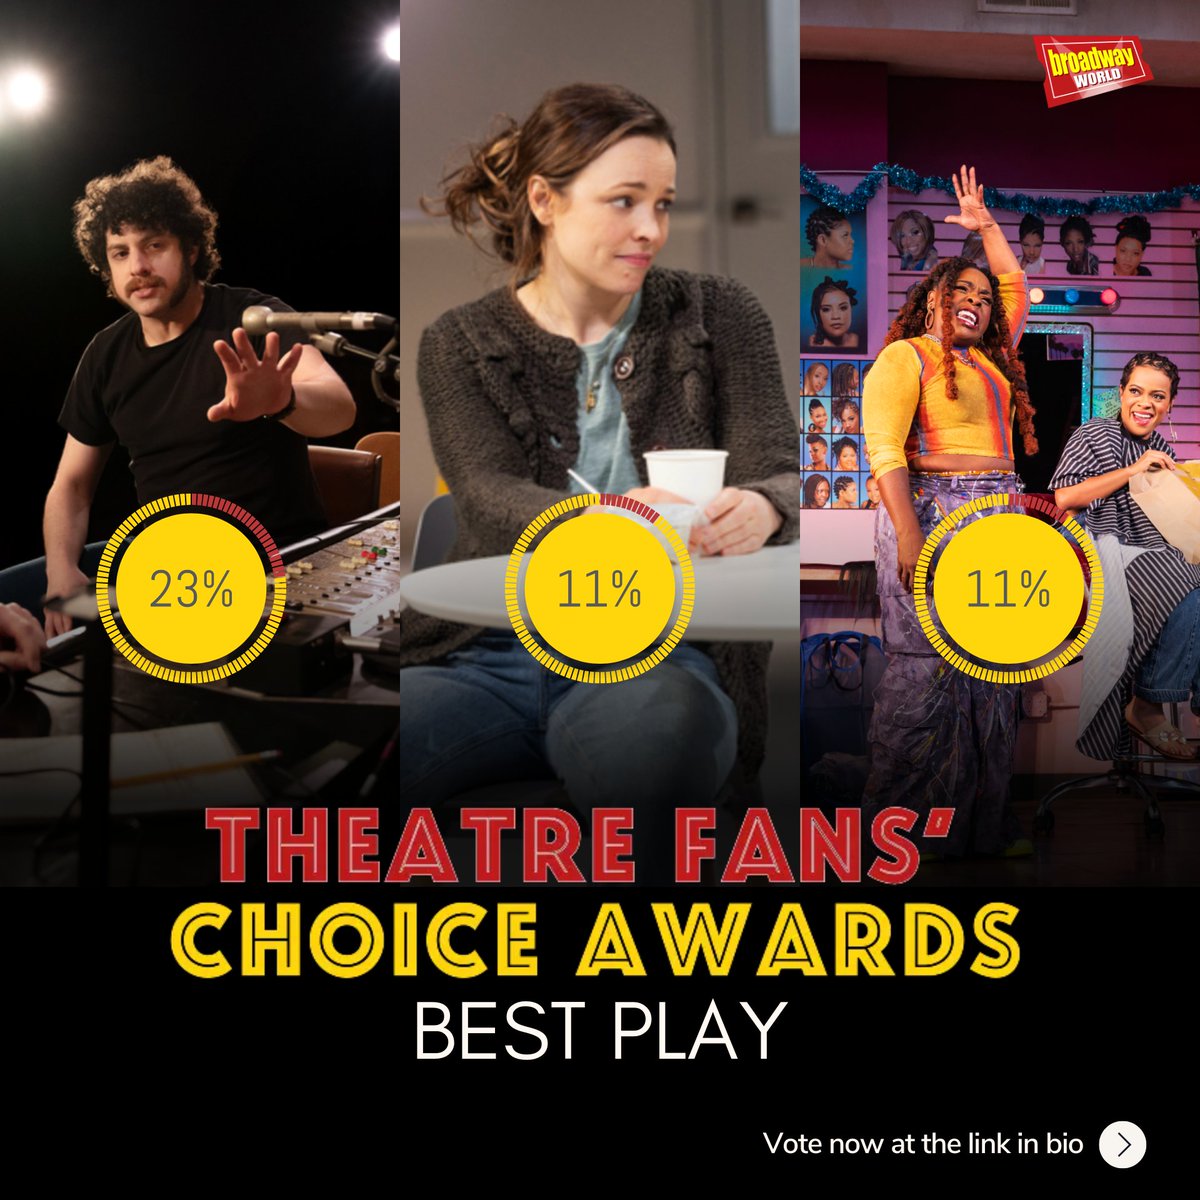 Vote now: bway.world/u2i4a Looking back at a season stacked with new plays, which one stood out most to you? In the Theatre Fans' Choice Awards, YOU get to decide which performers and productions are crowned as the best of the Broadway season. Vote now & comment below!